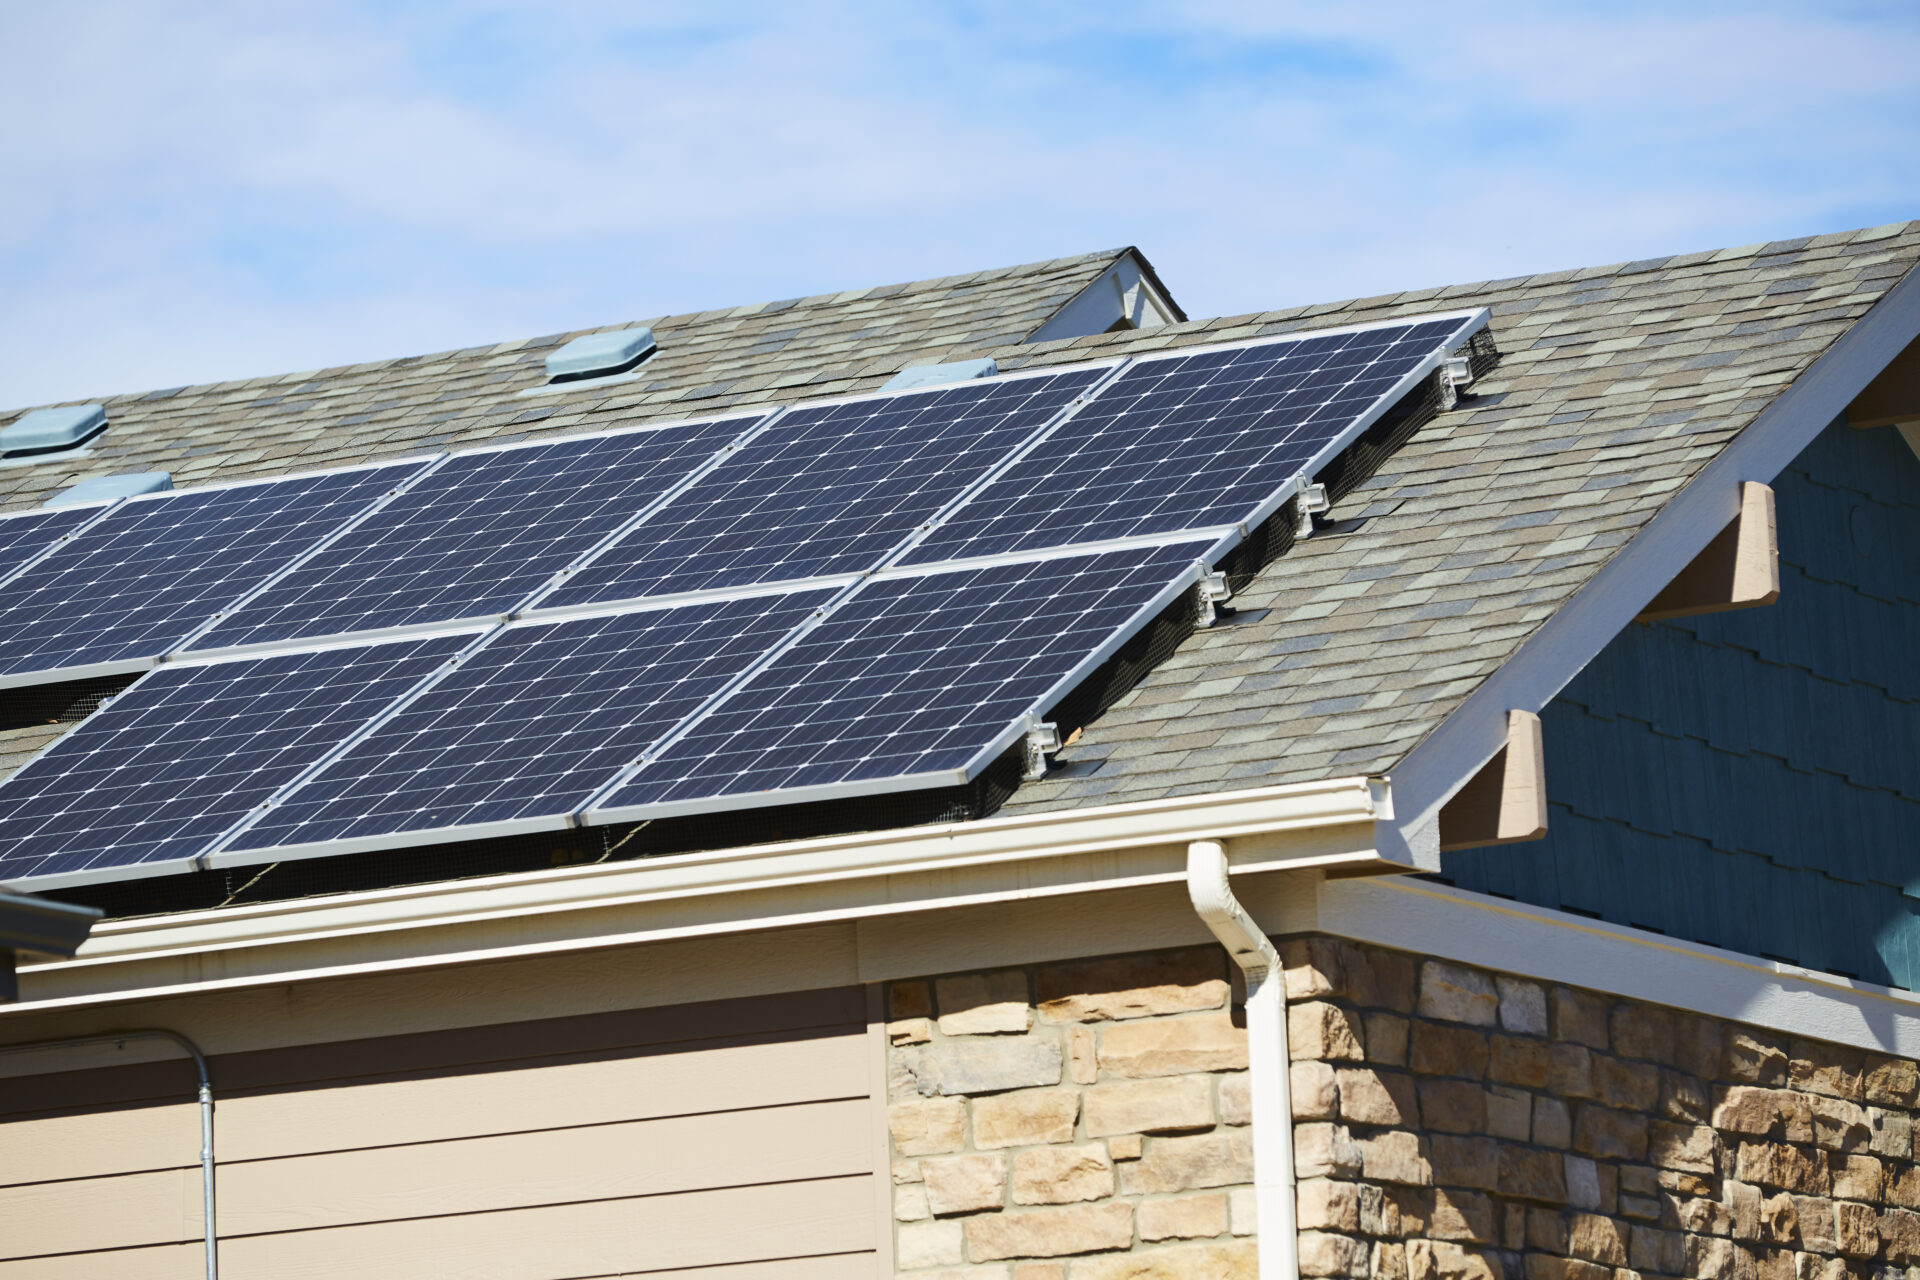 zoomed in on solar panels on the roof of a residential home, blue skies with minimal clouds above the house